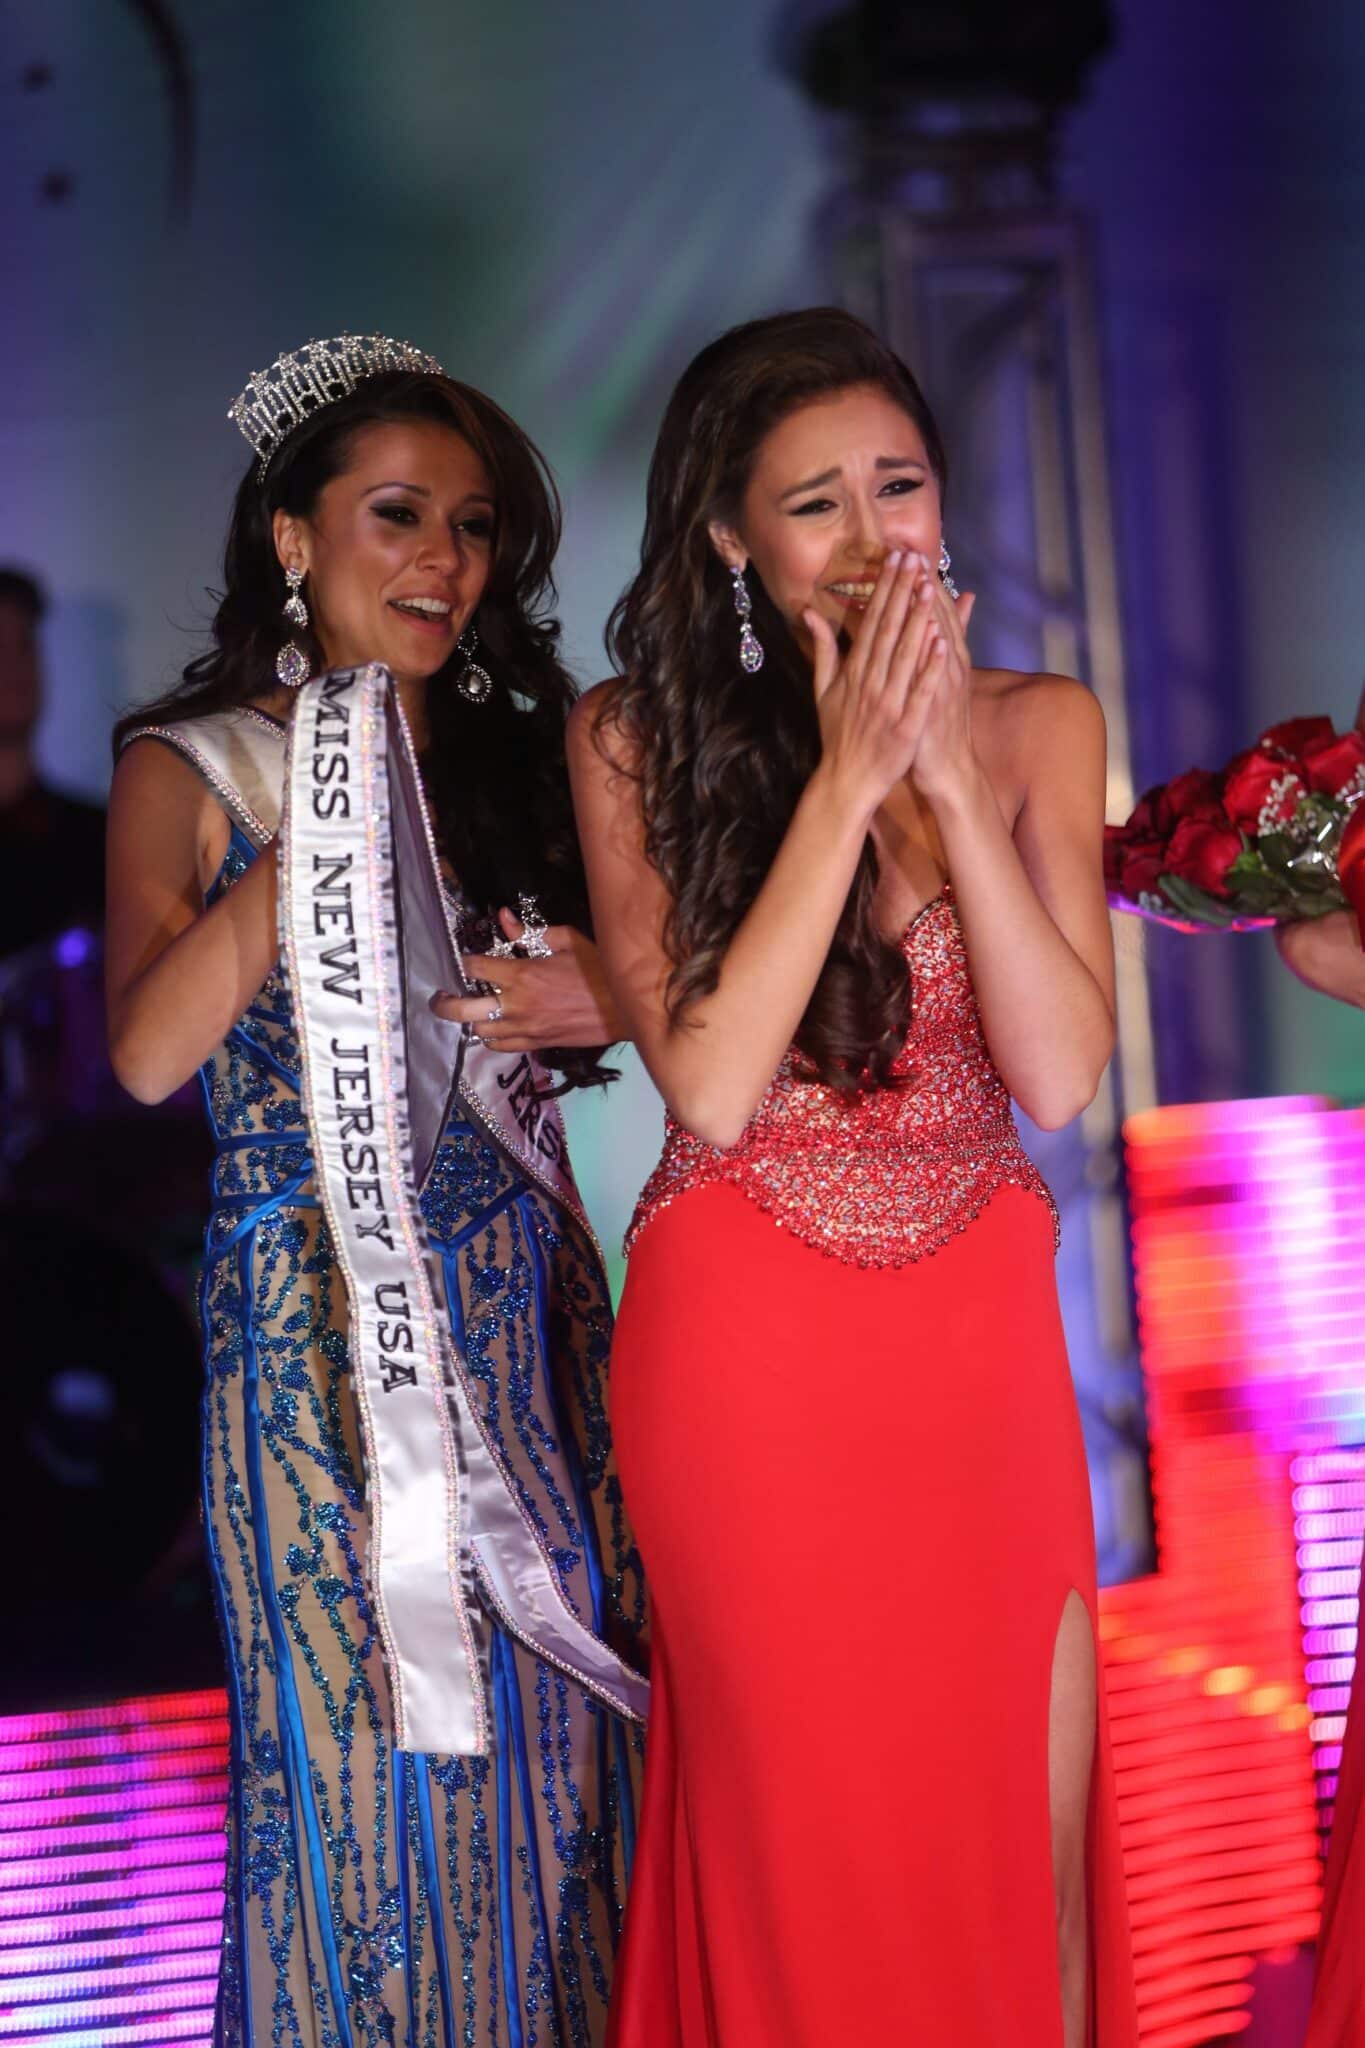 Vanessa Oriolo is crowned Miss New Jersey USA 2015